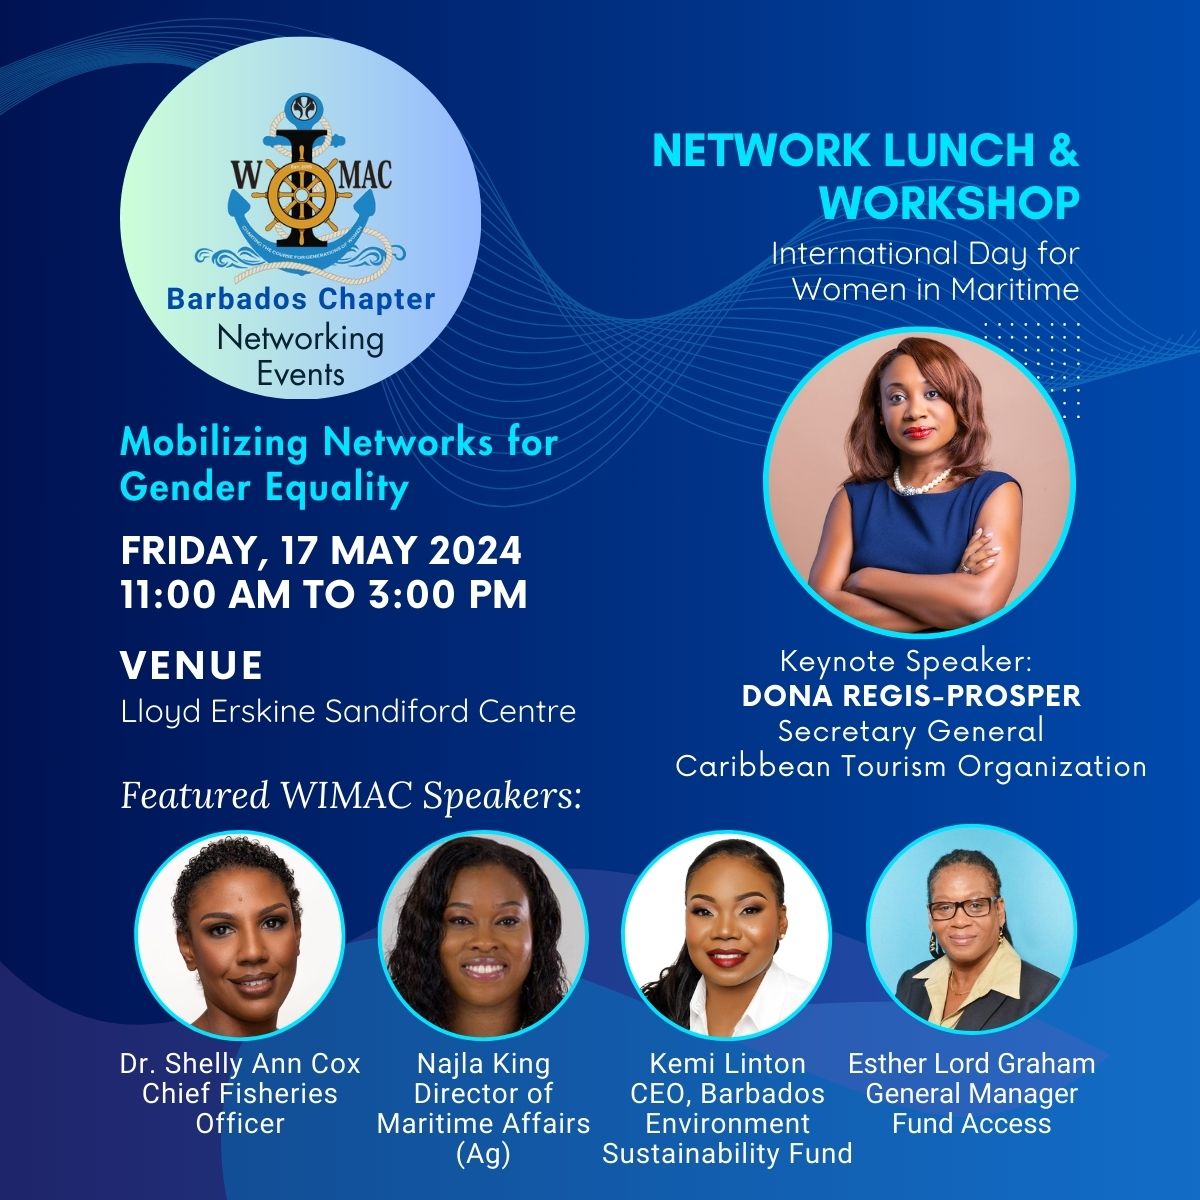 To commemorate International Day for Women in Maritime, CTO’s SG Dona Regis-Prosper will deliver the keynote address at the Women in Maritime Association, Caribbean Barbados Chapter Network Lunch & Workshop on Friday, May 17, at the Lloyd Erskine Sandiford Centre in Barbados.